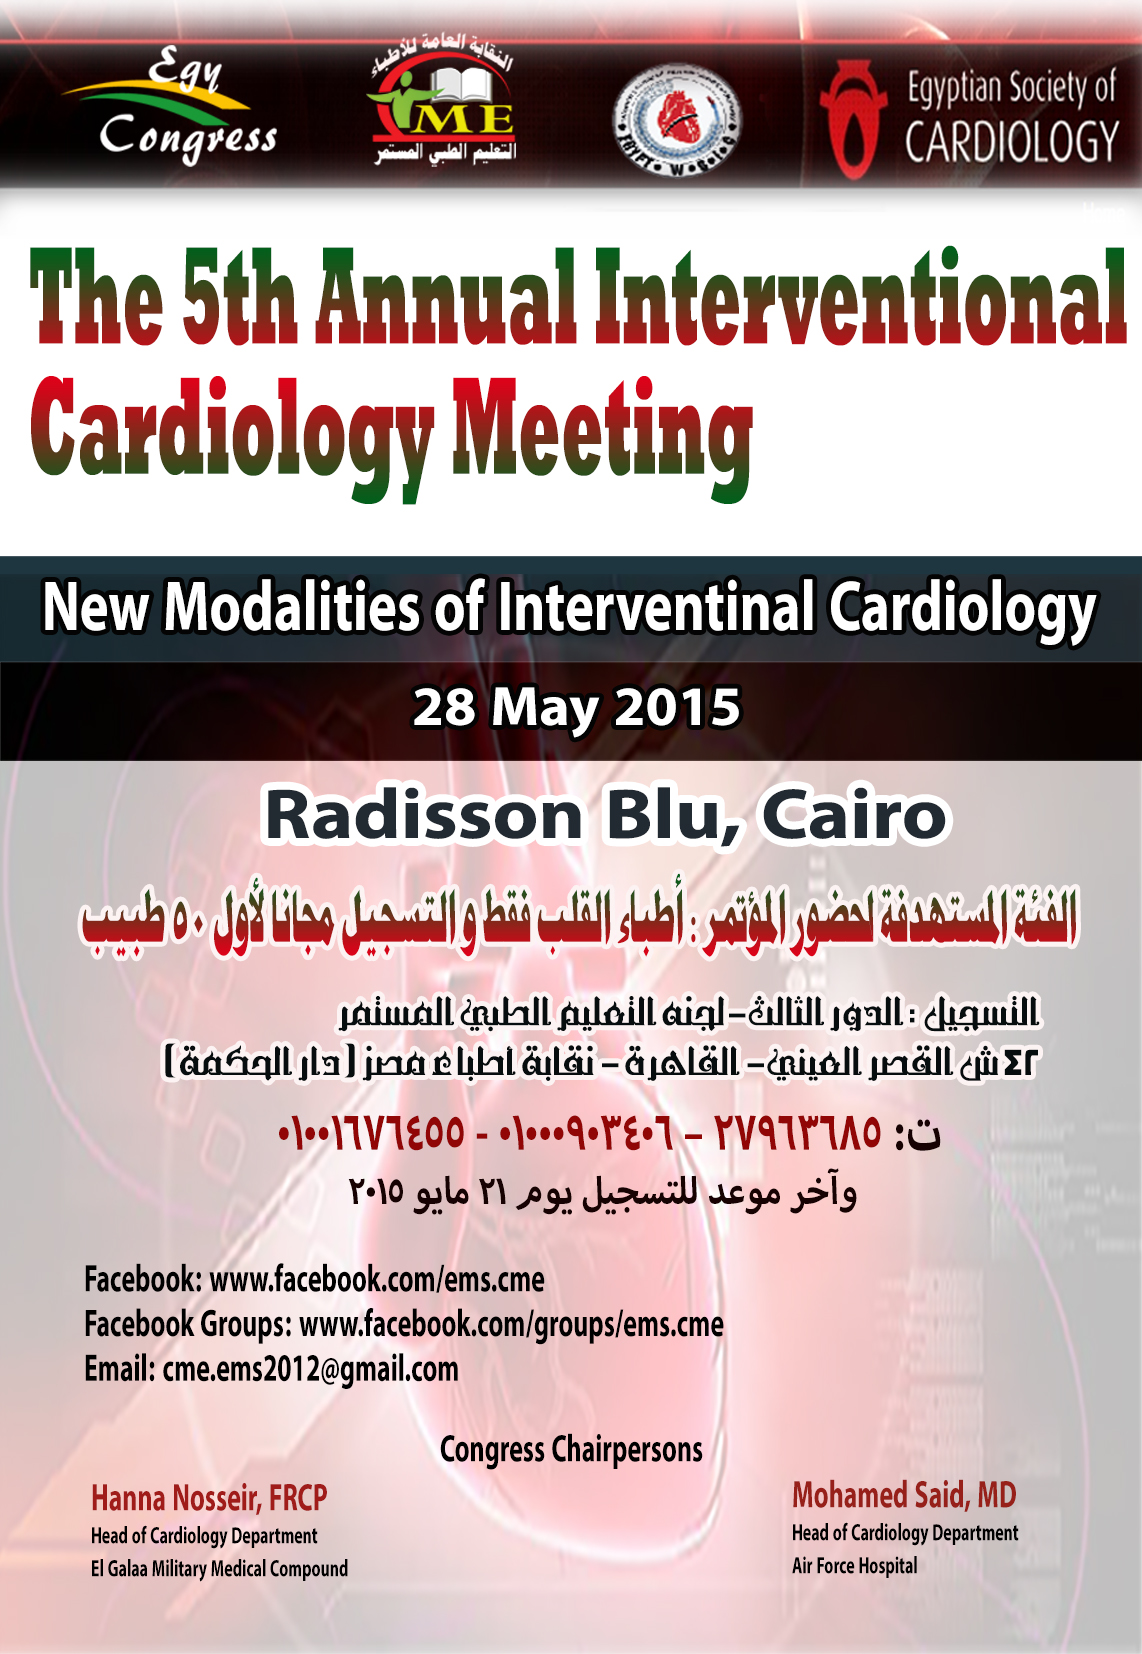 The 5th Annual Interventional Cardiology Meeting